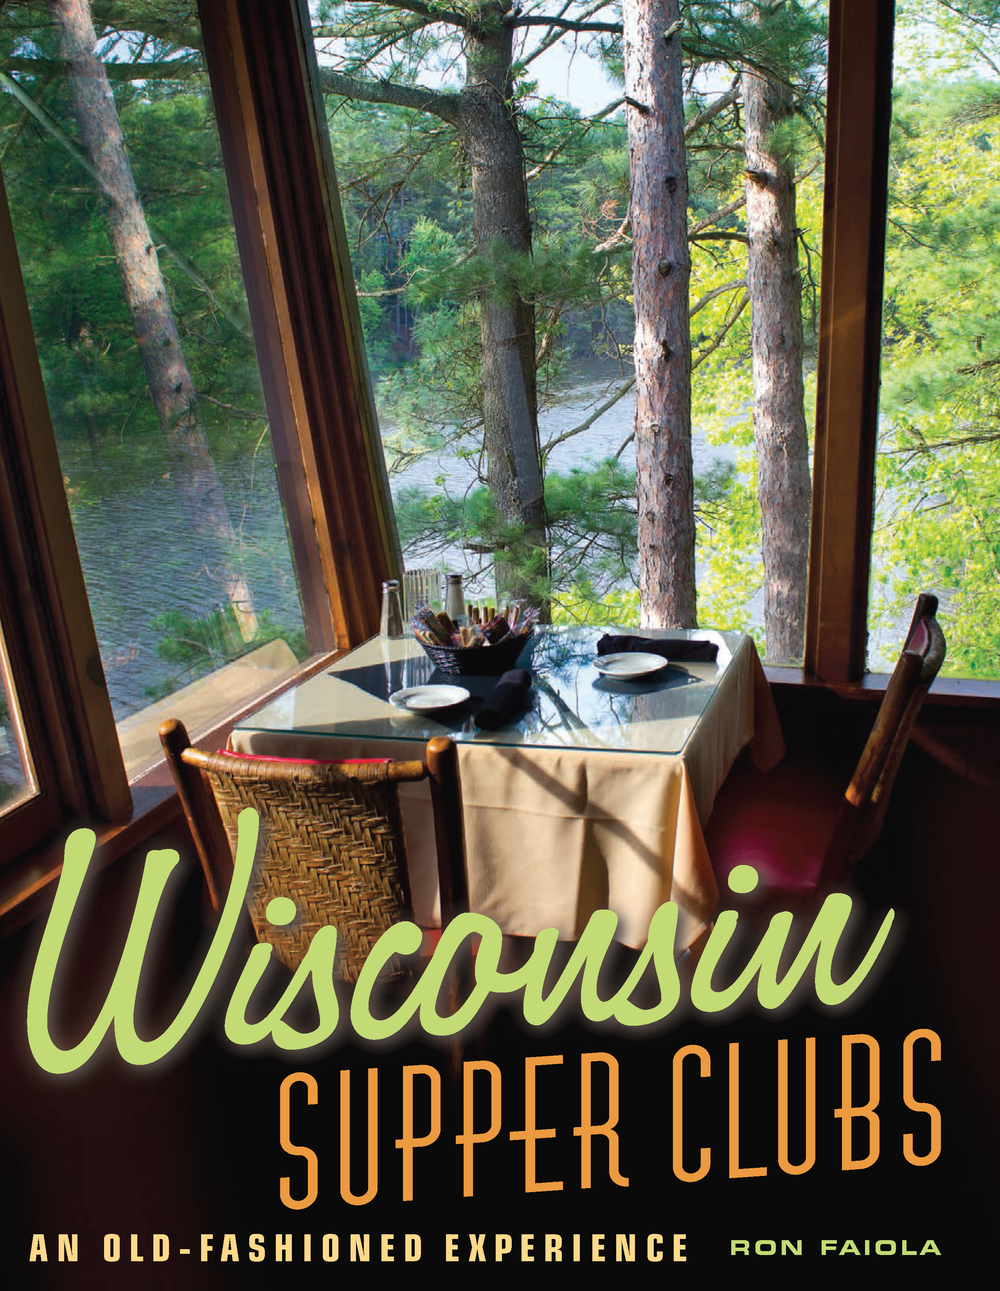 Something We Can All Agree On (Wisconsin Supper Clubs)